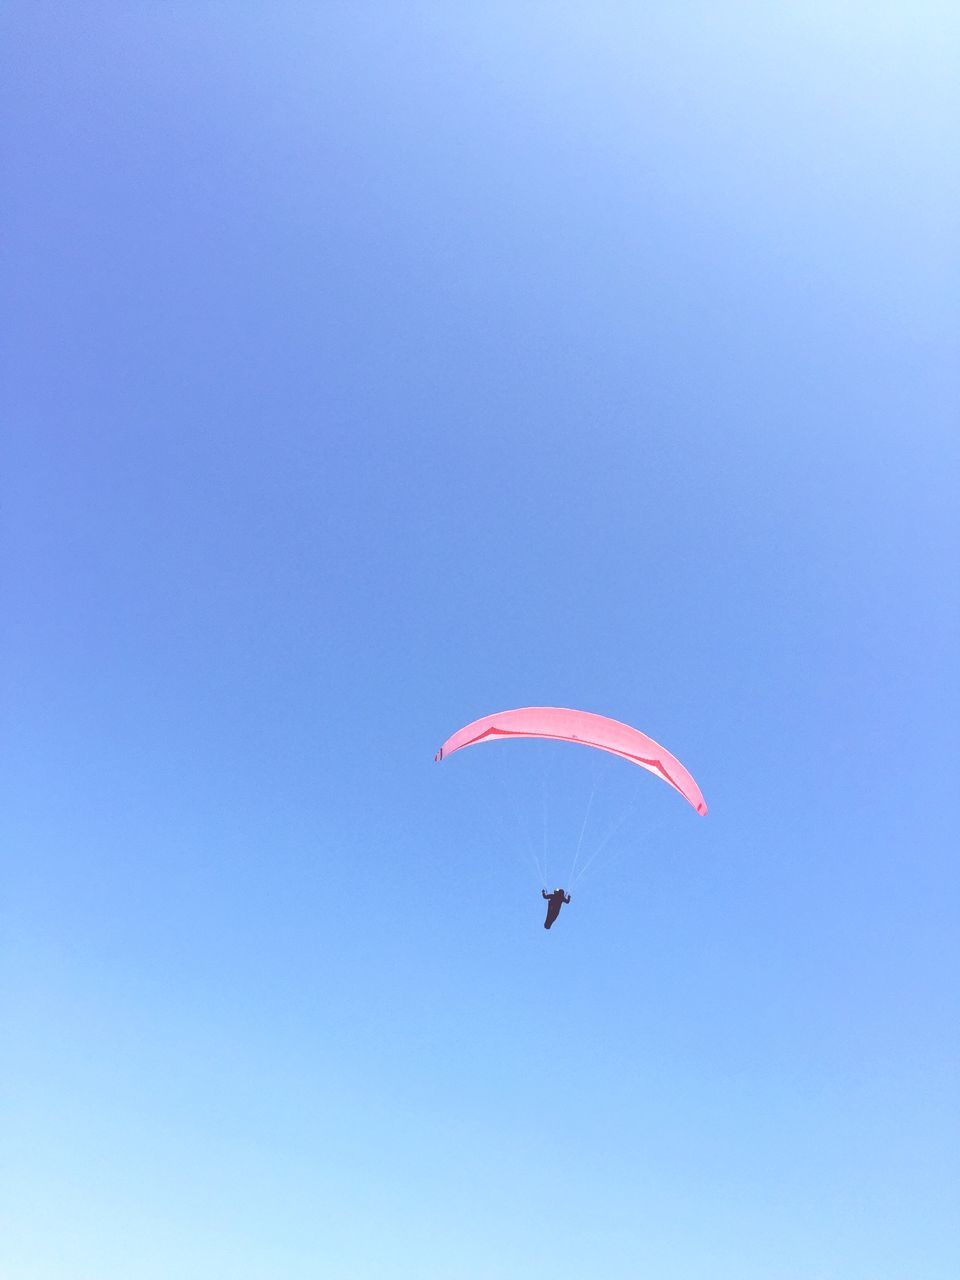 flying, mid-air, low angle view, clear sky, parachute, freedom, extreme sports, copy space, blue, paragliding, kite - toy, exhilaration, adventure, motion, parachuting, kite, fun, sky, multi colored, leisure activity